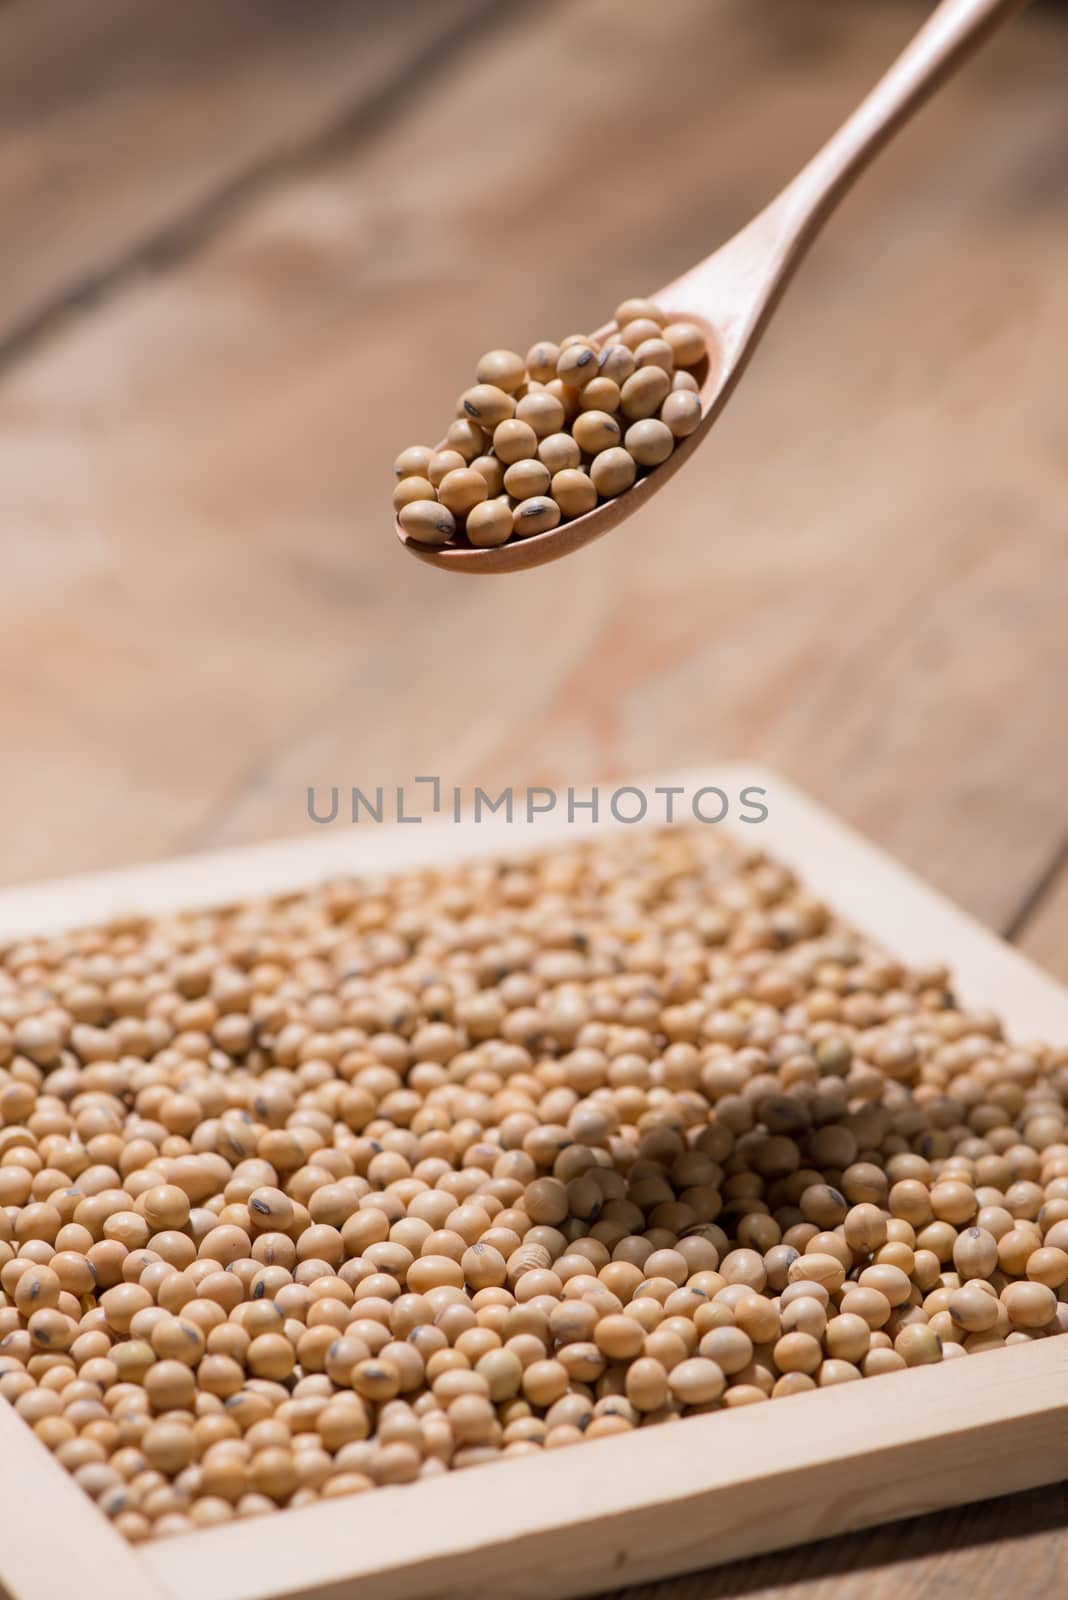 Soya beans in spoon on wooden table. by makidotvn